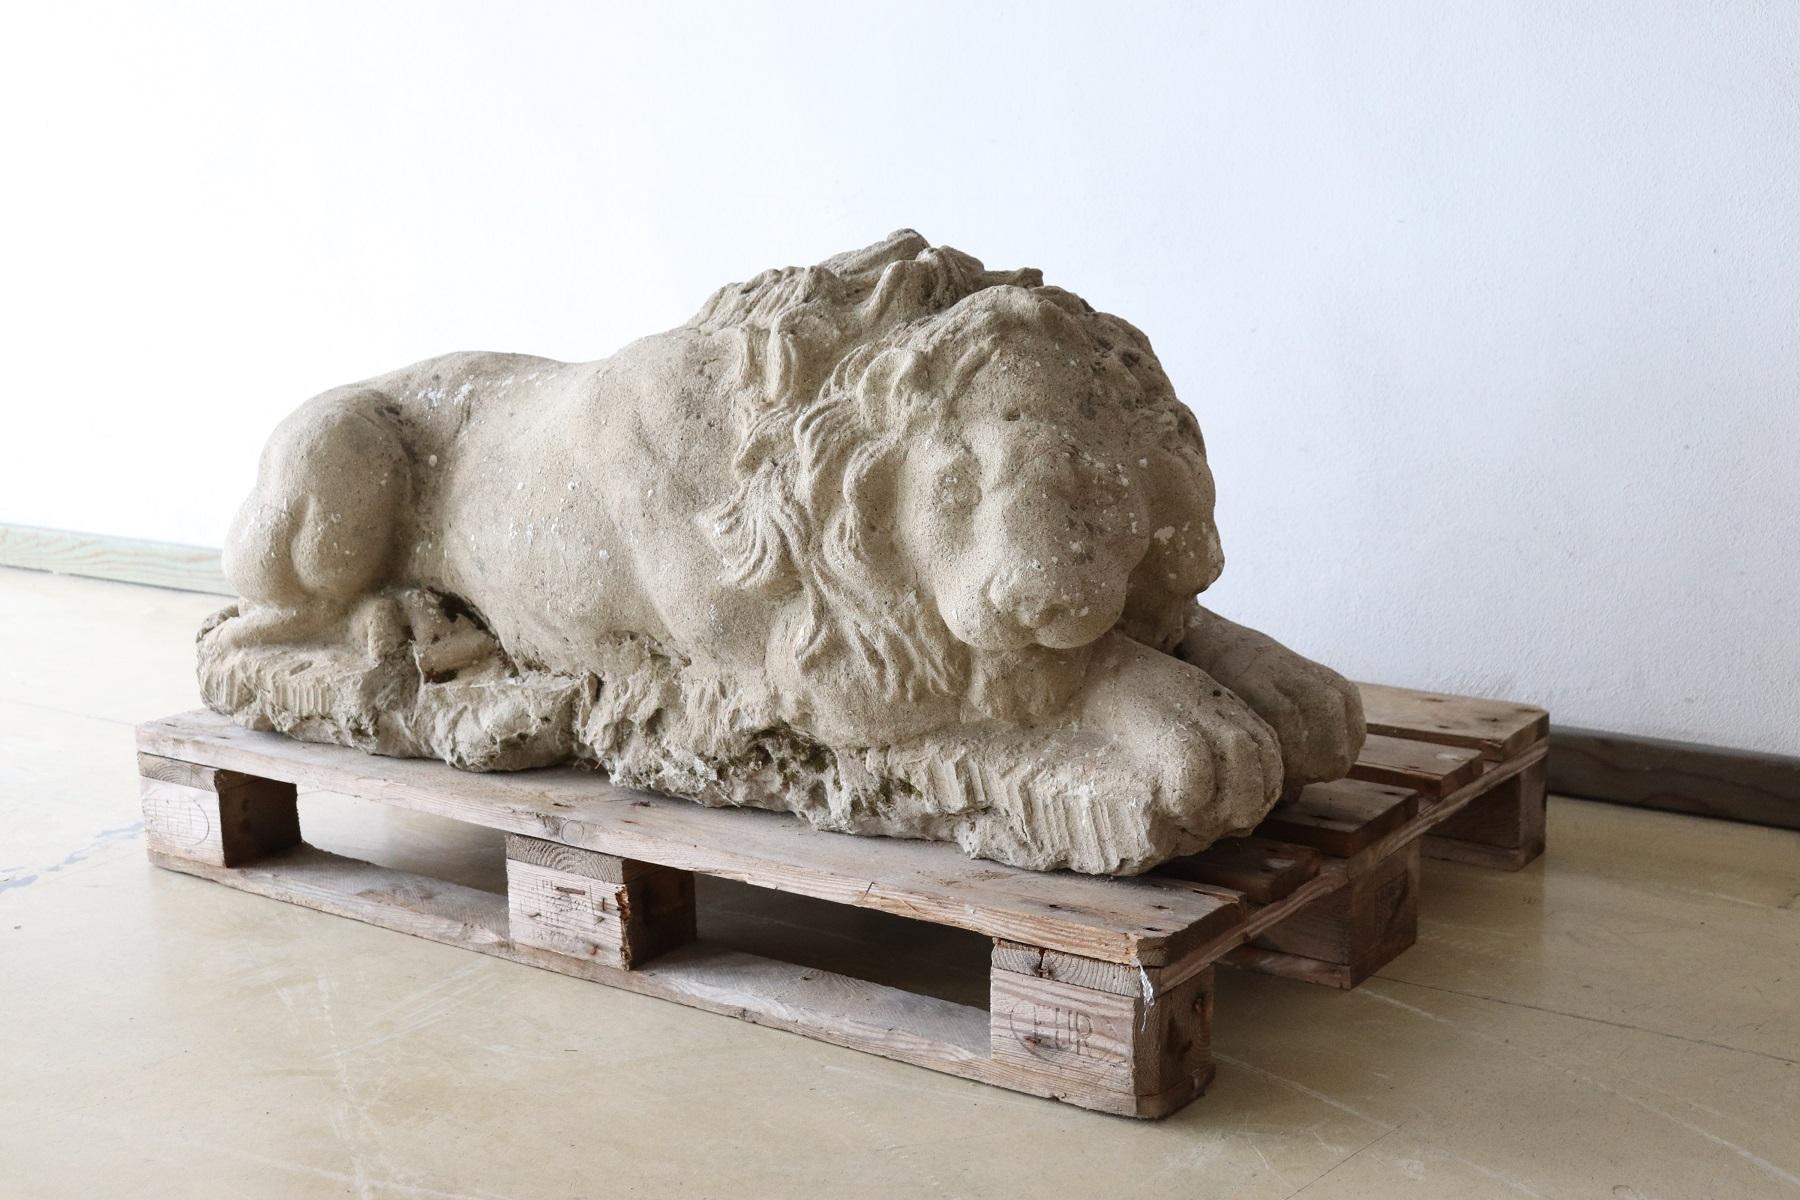 Refined lion sculpture in hand carved stone dating 1780s. Performed with great artistic skill to note the details of the lion's mane and muscles. This lion is represented in all its grandeur in a moment of tranquility. Proven Italian private